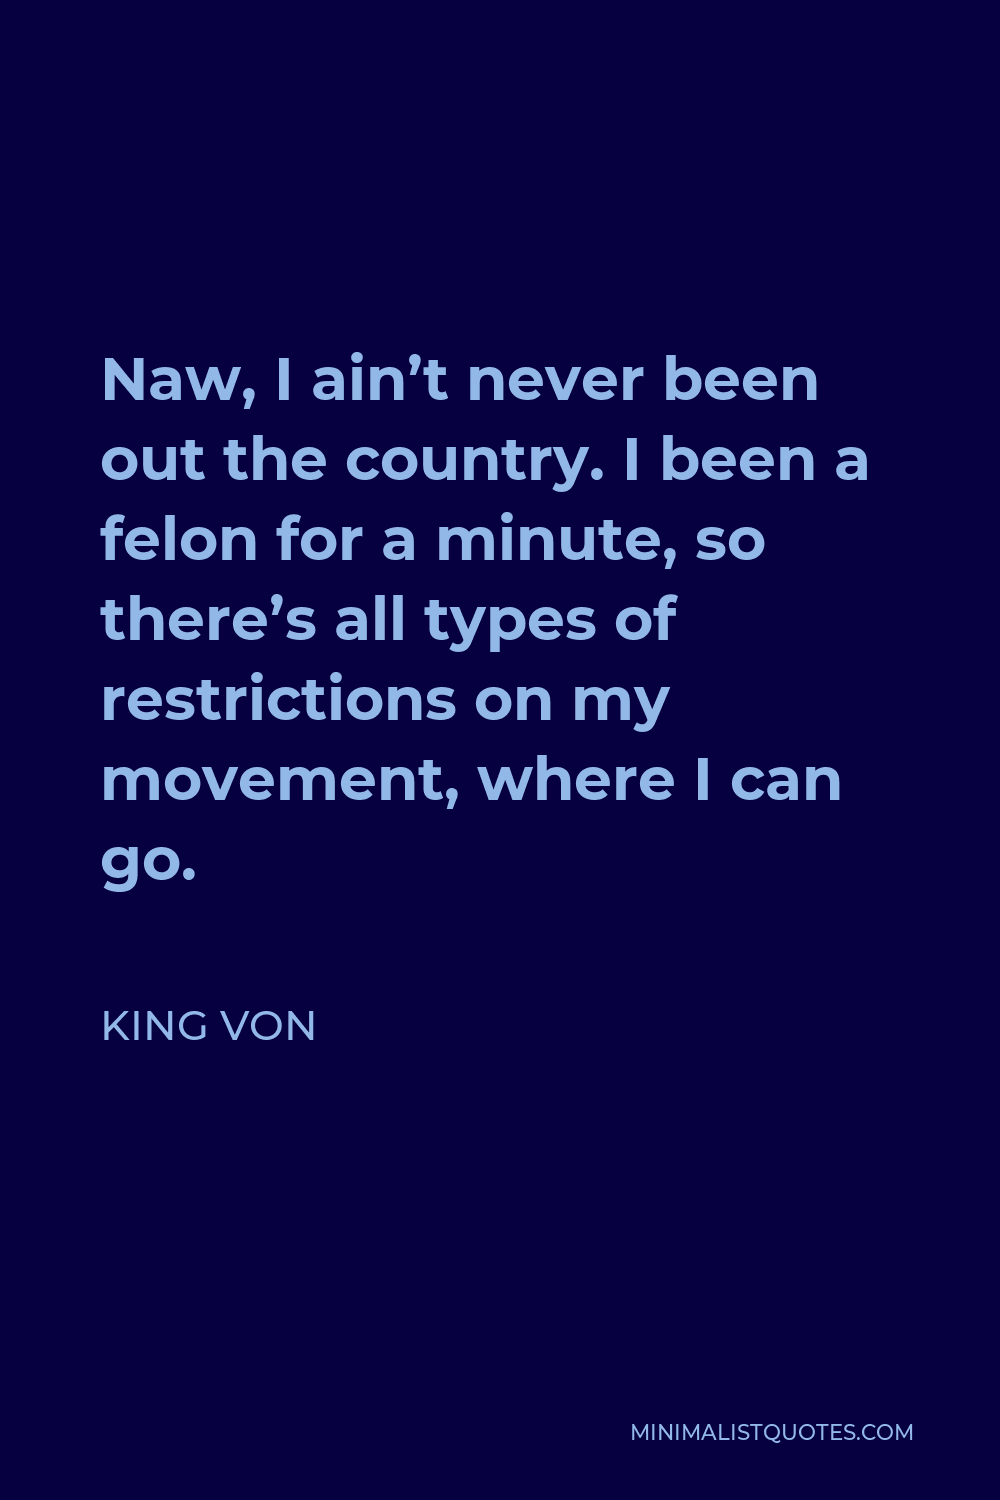 King Von Quote - Naw, I ain’t never been out the country. I been a felon for a minute, so there’s all types of restrictions on my movement, where I can go.